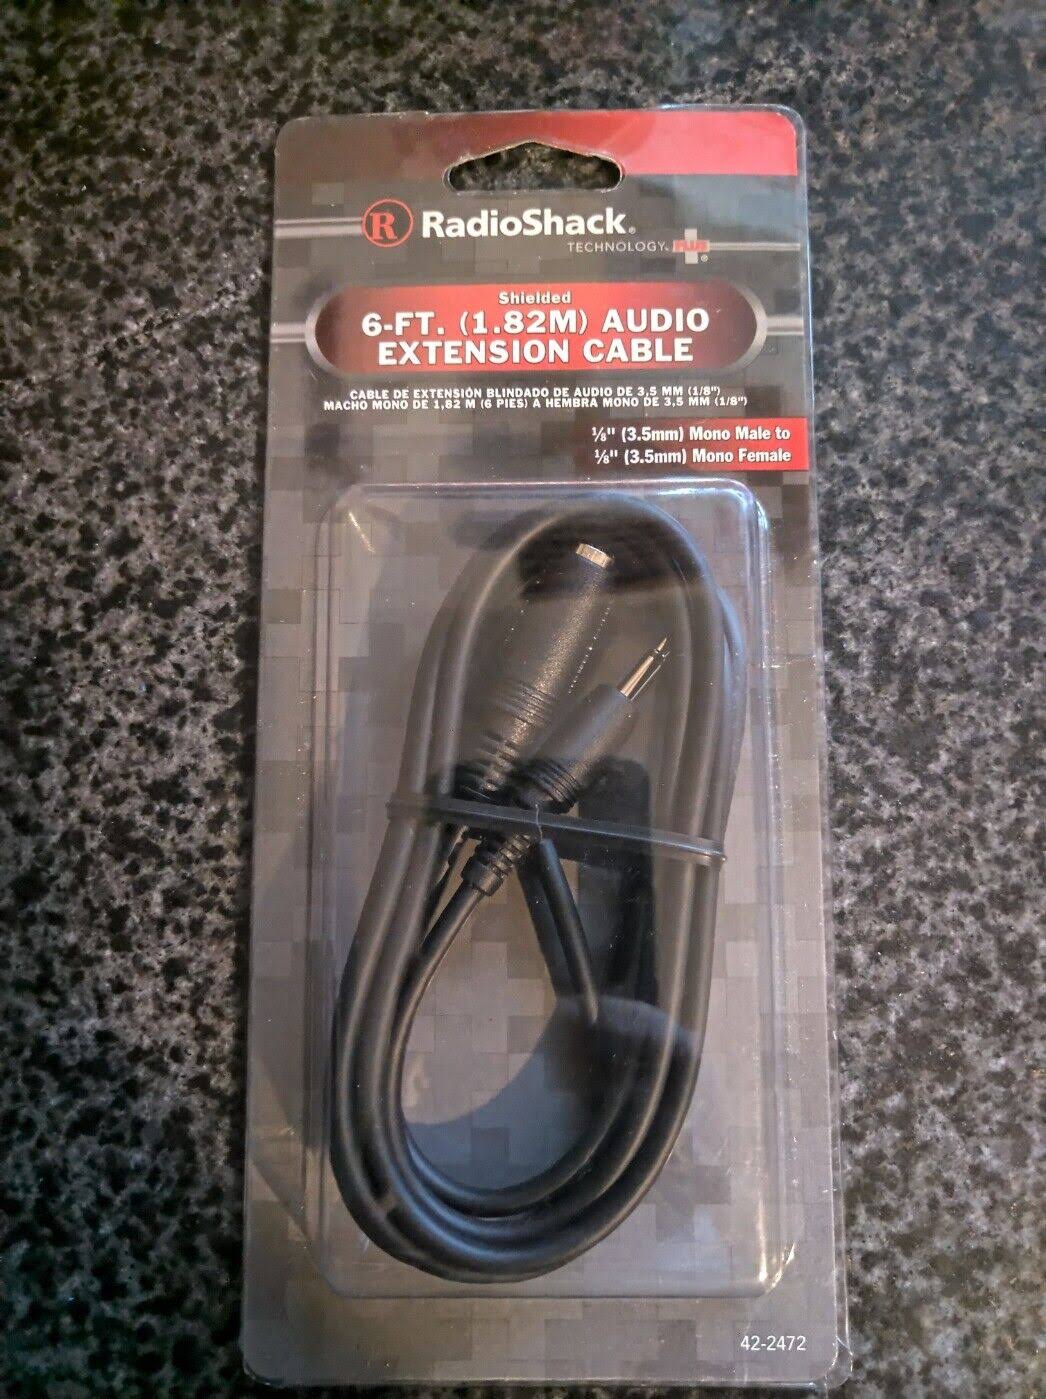 Radioshack 42-2472a Shielded Audio Extension Cable - Black, 6'